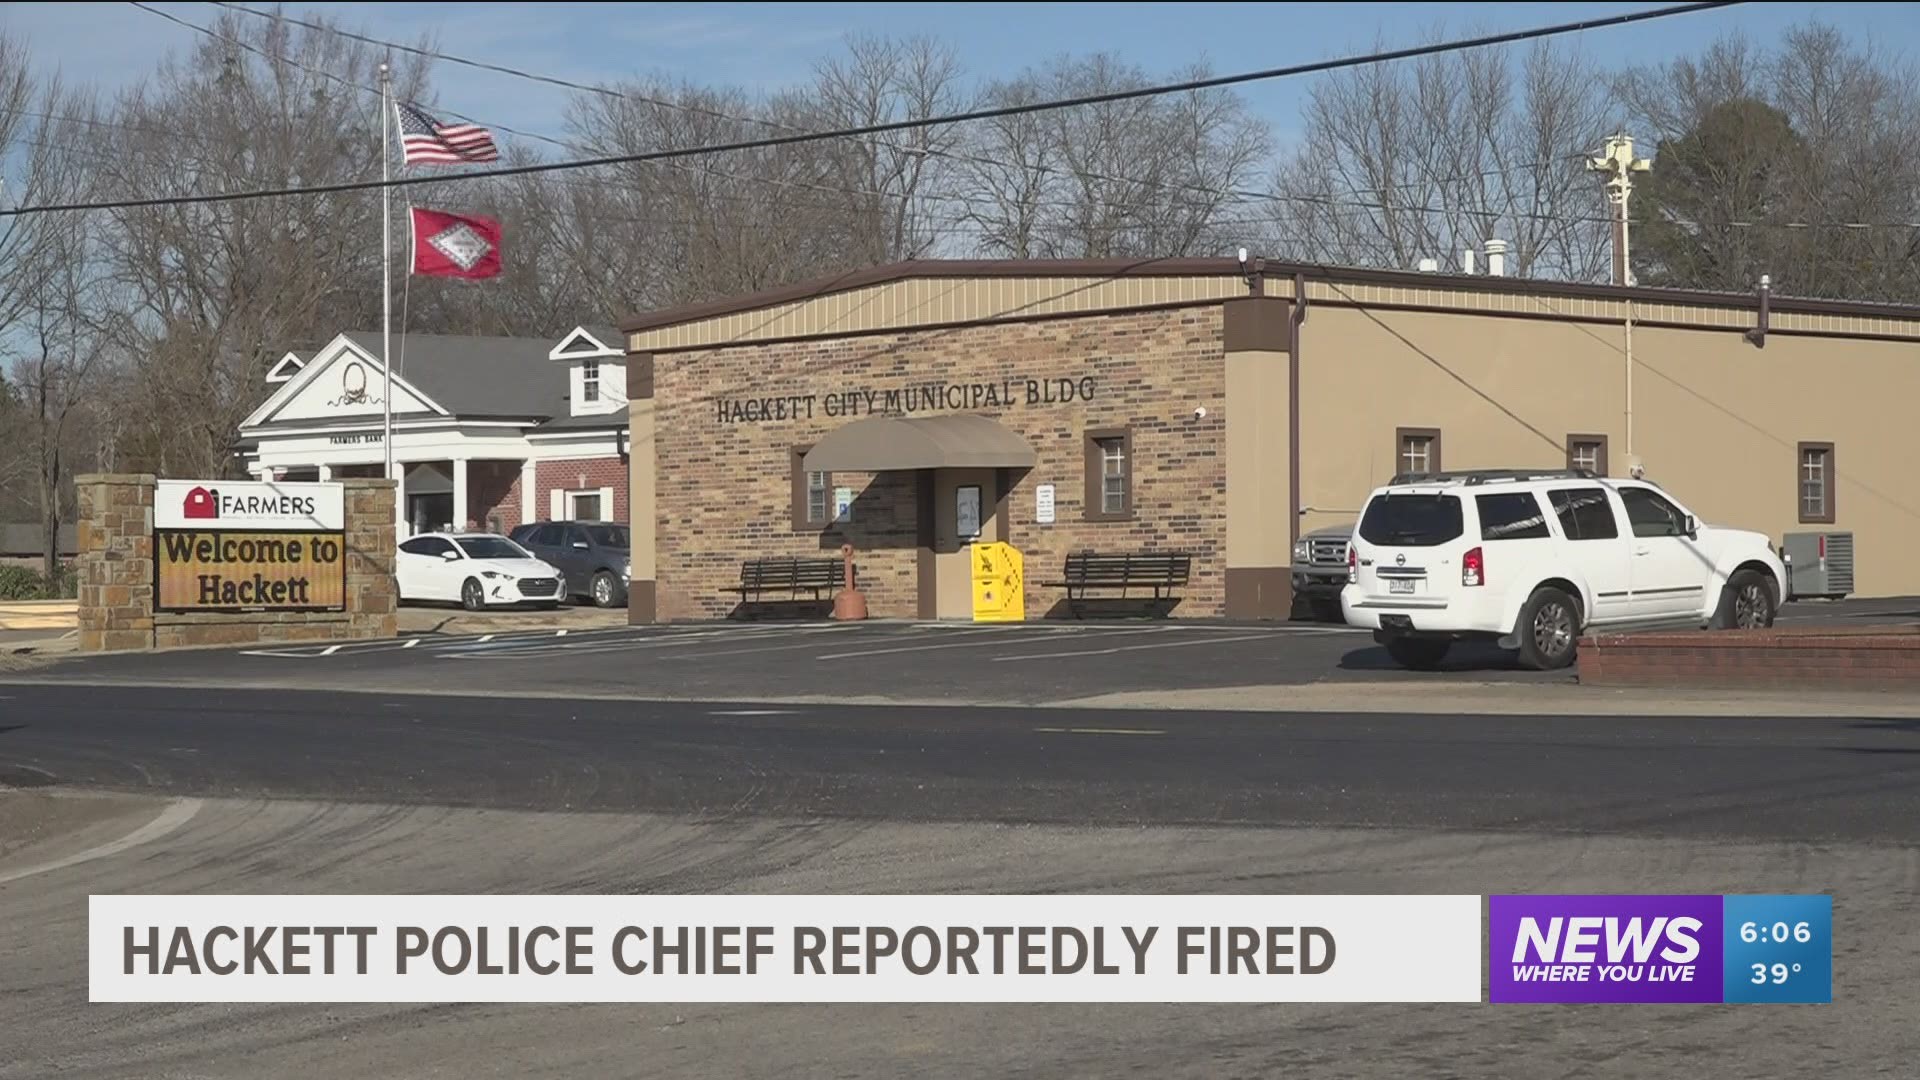 Sources say Hackett police chief fired, Sebastian Co. deputies now patrolling city